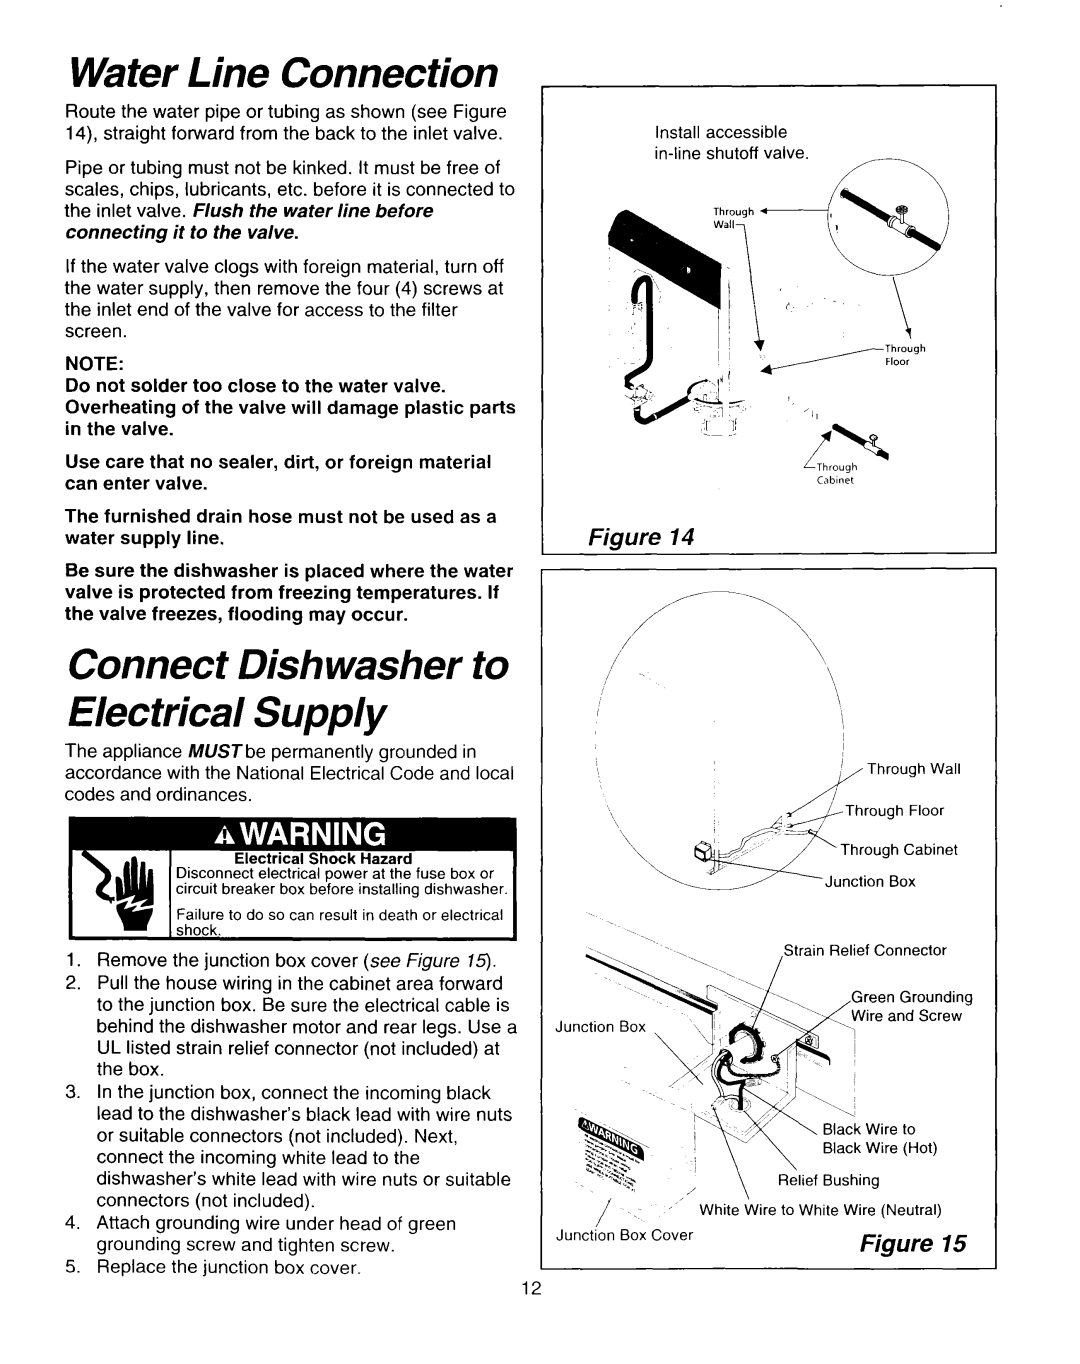 Whirlpool RUD0800EB installation instructions Water Line Connection, Connect Dishwasher to Electrical Supply 